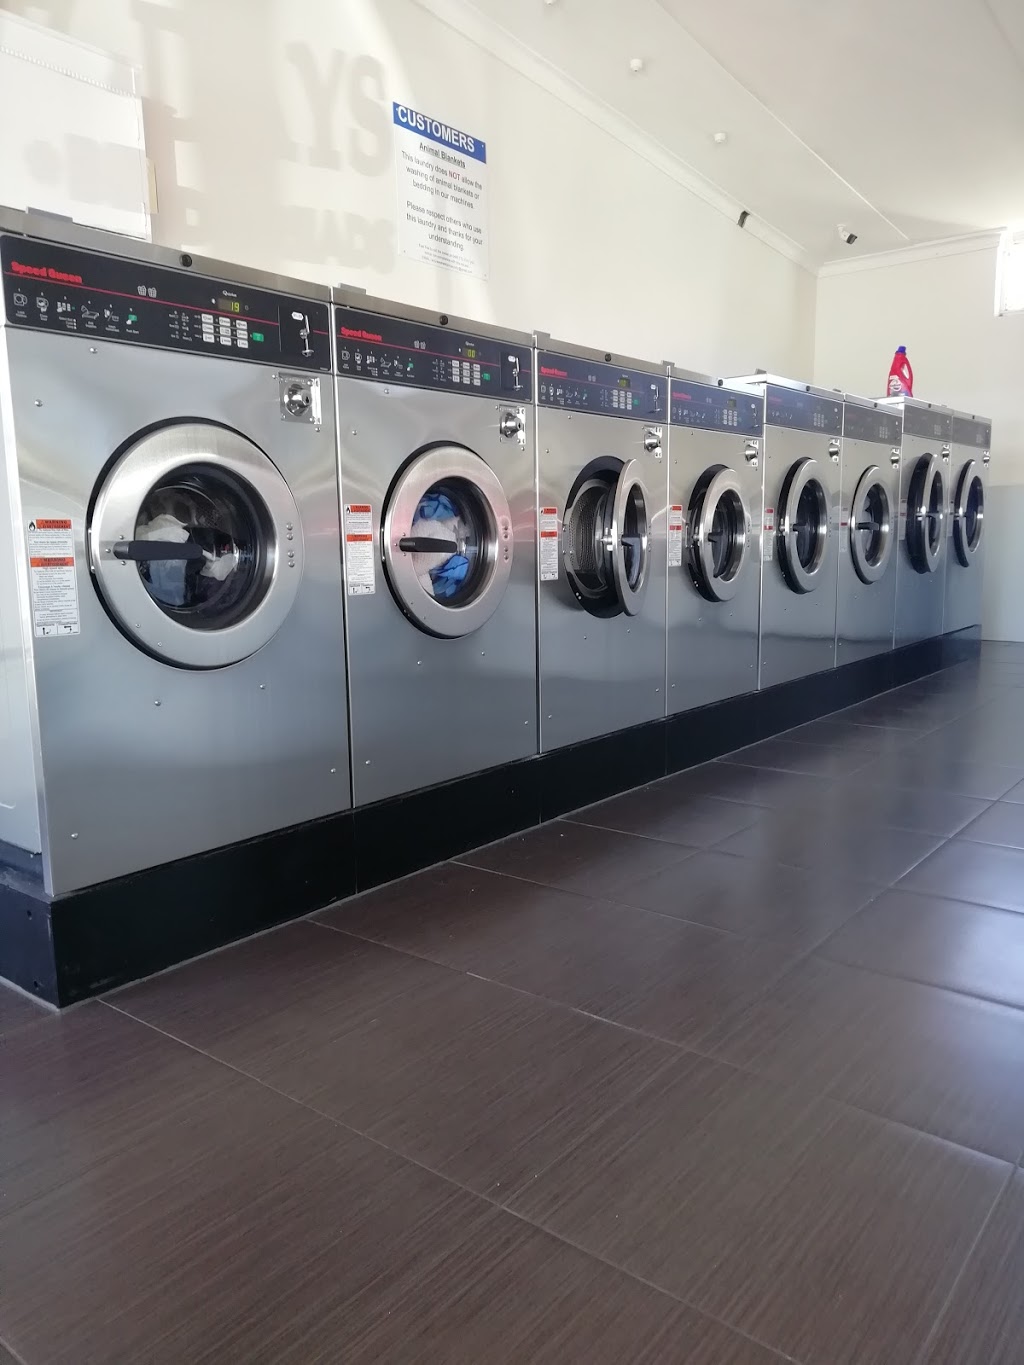 Andrew Street Coin Laundry | laundry | 6 Andrew St, Mount Waverley VIC 3149, Australia | 0490773274 OR +61 490 773 274